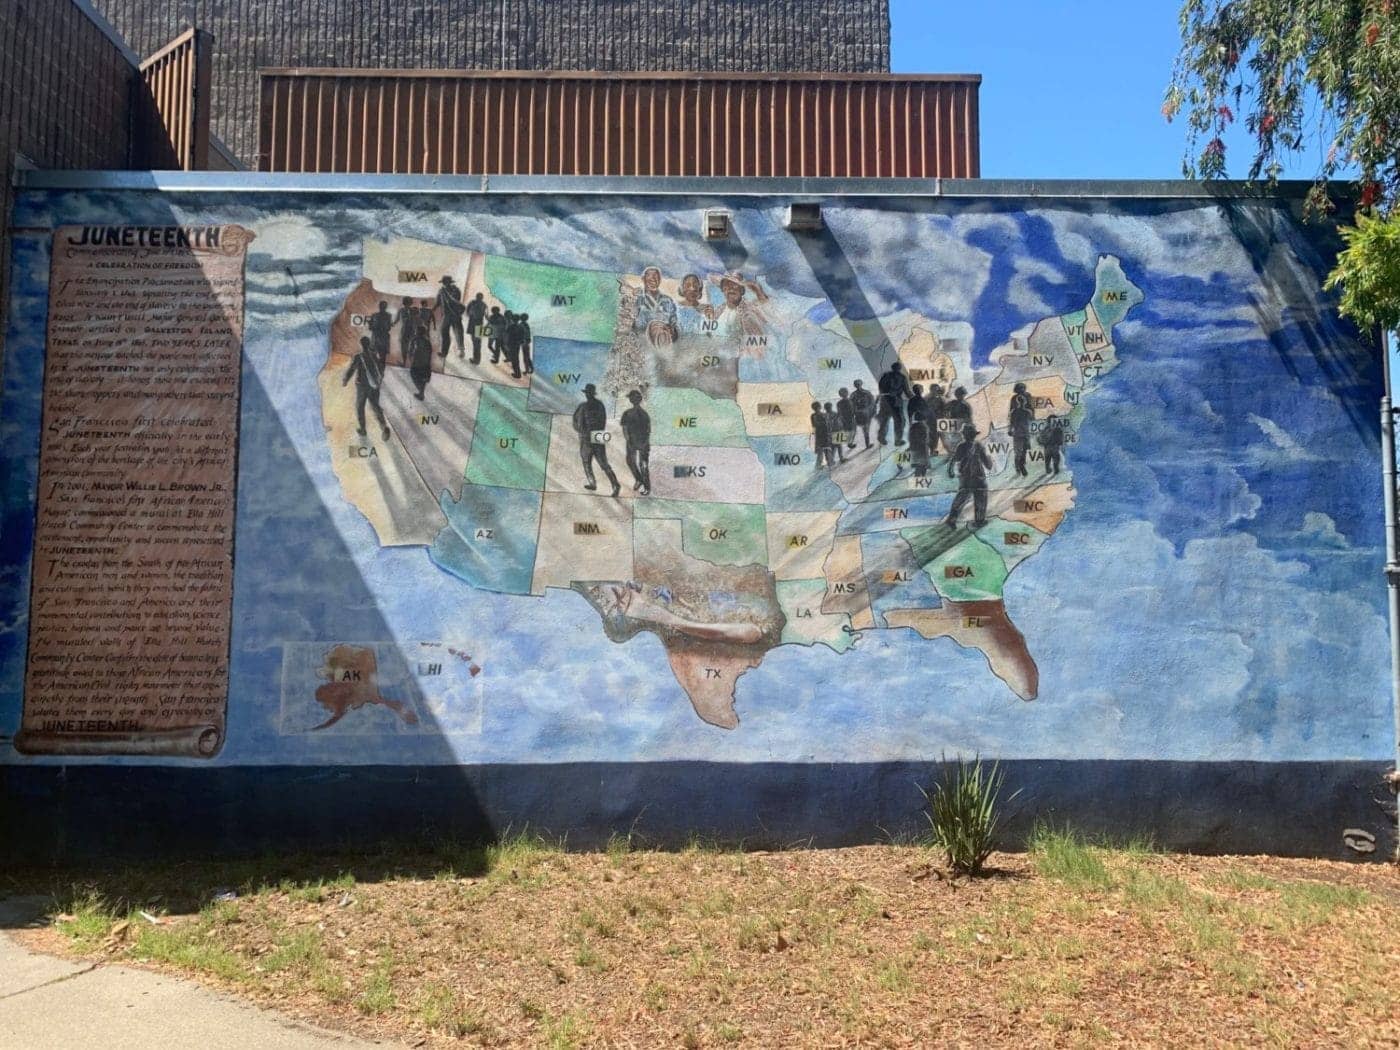 Eugene-White-Juneteenth-mural-1400x1050, The Green Streets uplifts our people!, Local News & Views News & Views 